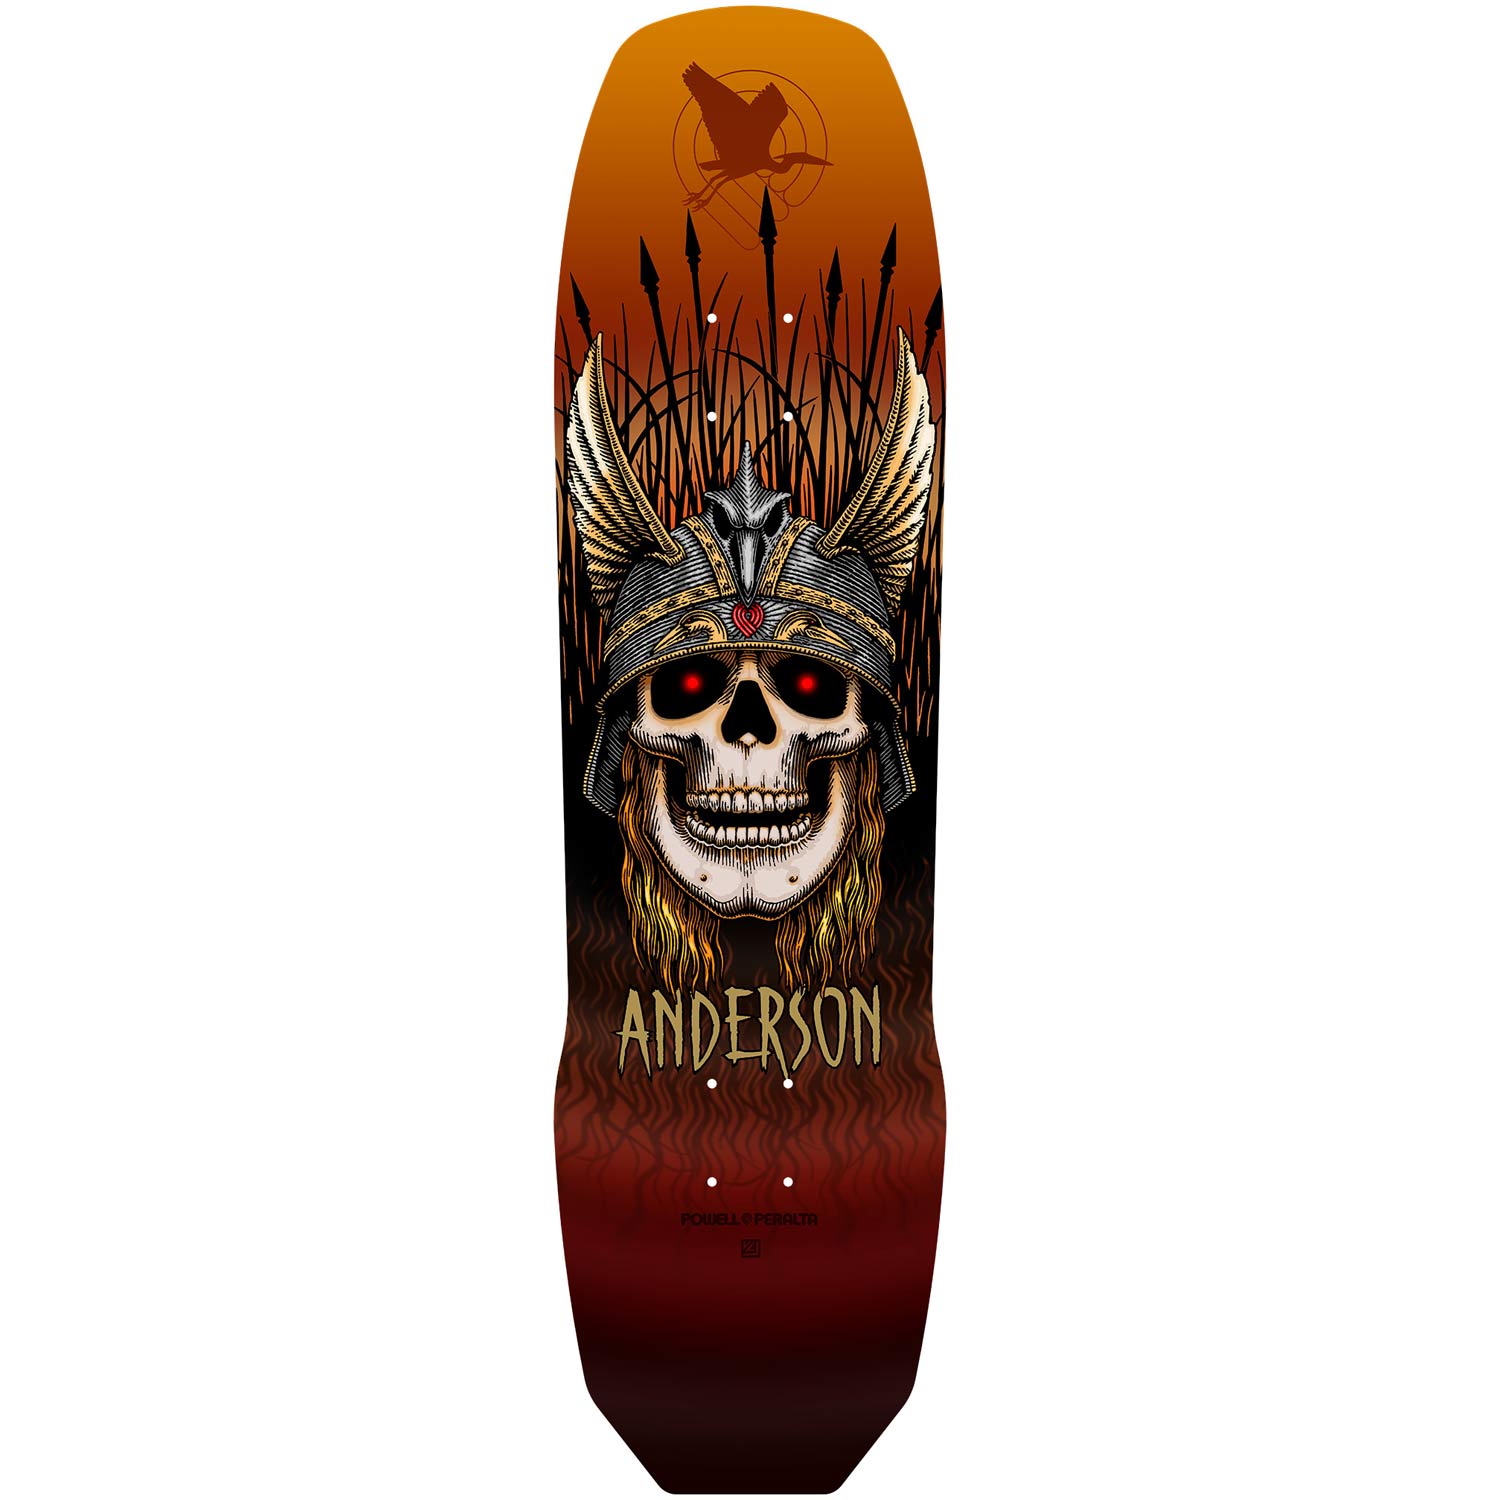 POWELL-PERALTA DECK ANDY ANDERSON 7 PLY "RUST" (8.45") - The Drive Skateshop